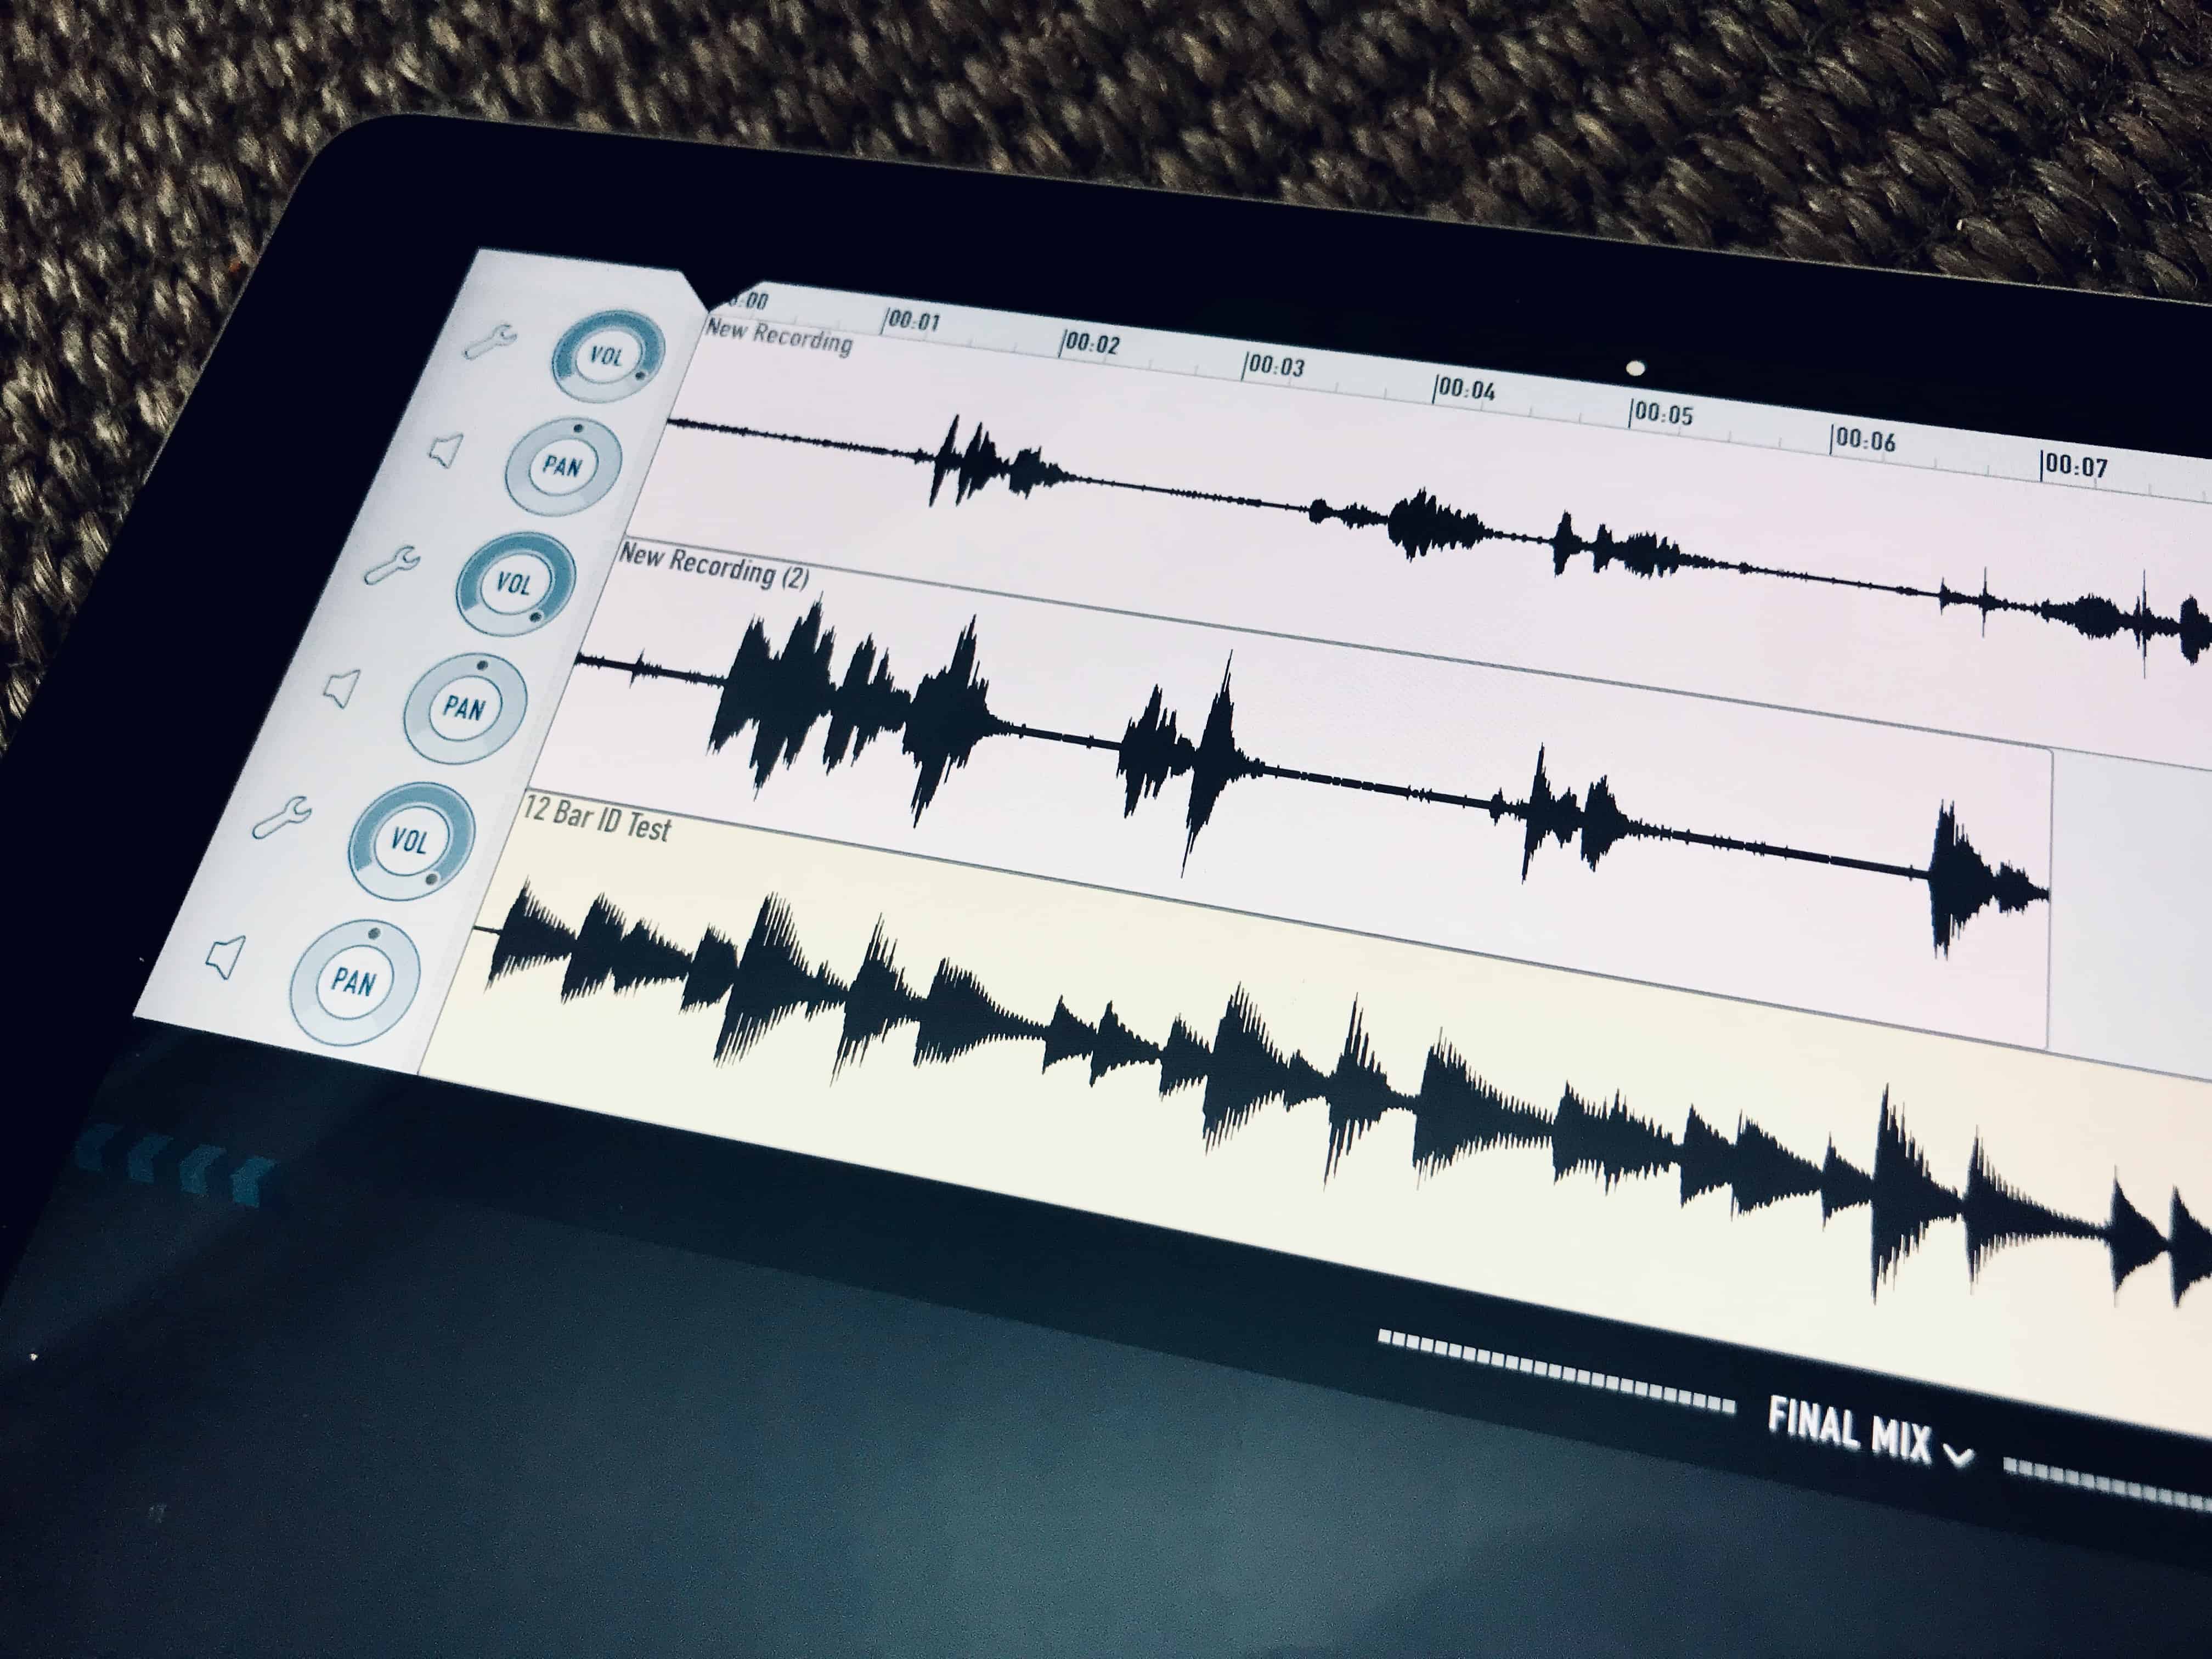 Short of recording Skype, Ferrite does everything you need to make a podcast.